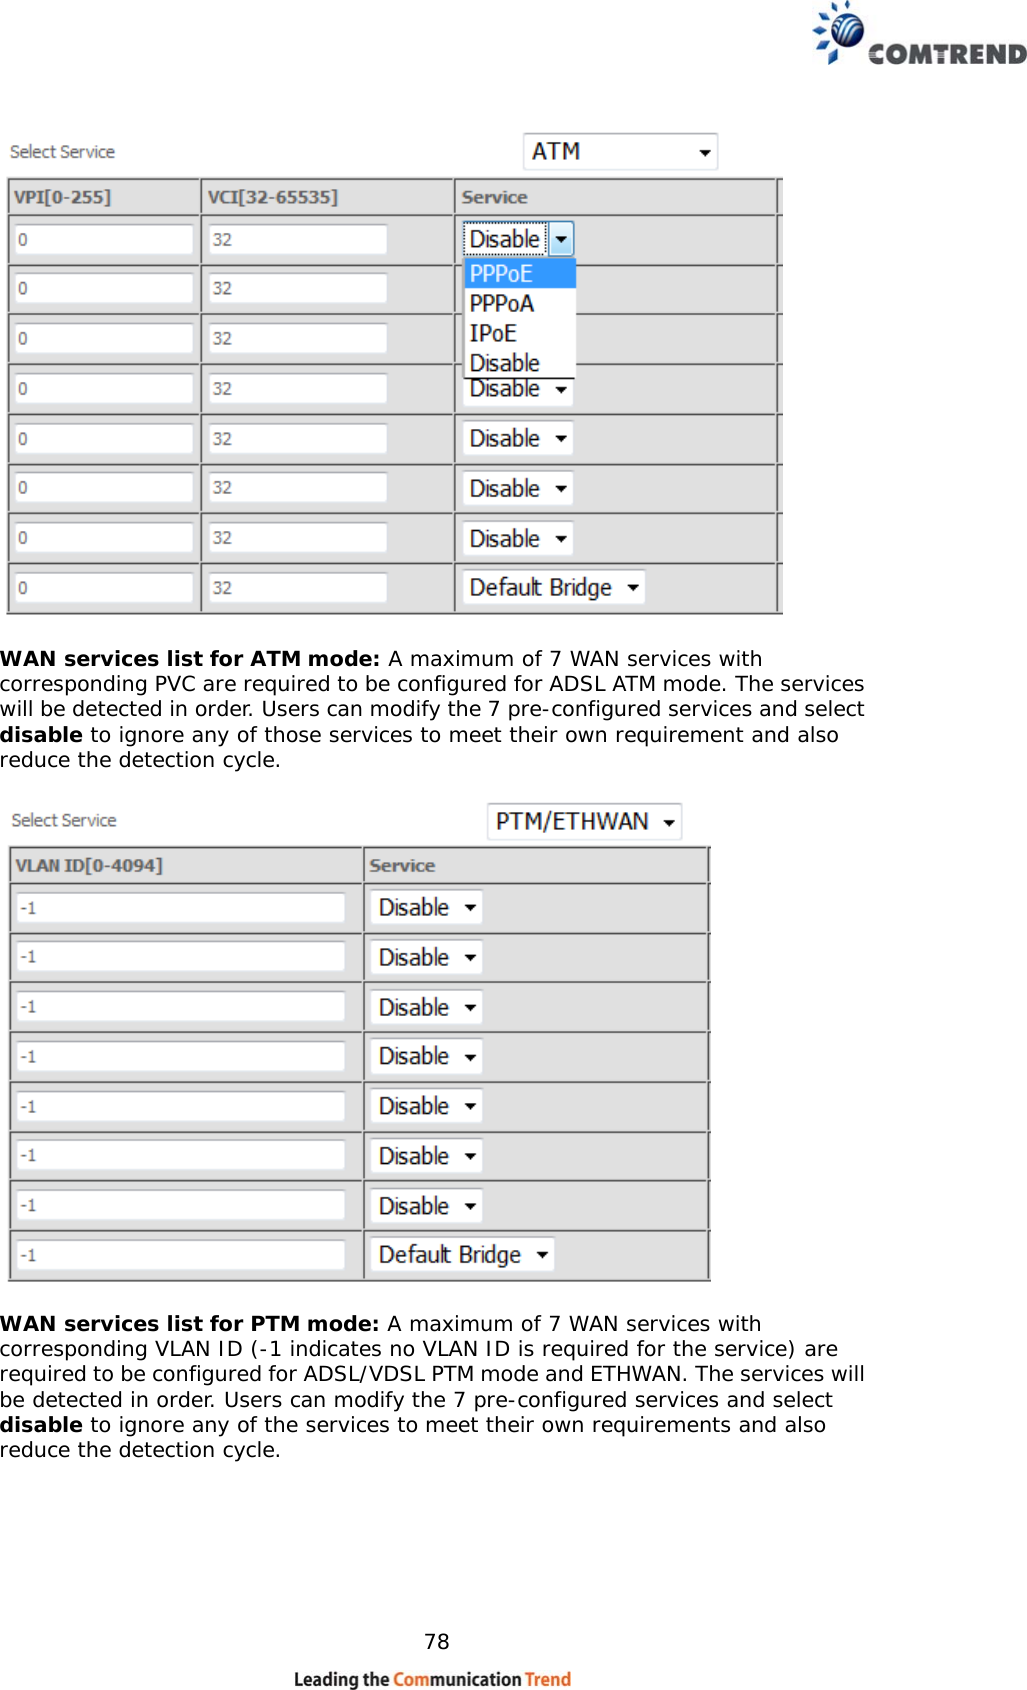    78   WAN services list for ATM mode: A maximum of 7 WAN services with corresponding PVC are required to be configured for ADSL ATM mode. The services will be detected in order. Users can modify the 7 pre-configured services and select disable to ignore any of those services to meet their own requirement and also reduce the detection cycle.    WAN services list for PTM mode: A maximum of 7 WAN services with corresponding VLAN ID (-1 indicates no VLAN ID is required for the service) are required to be configured for ADSL/VDSL PTM mode and ETHWAN. The services will be detected in order. Users can modify the 7 pre-configured services and select disable to ignore any of the services to meet their own requirements and also reduce the detection cycle.  